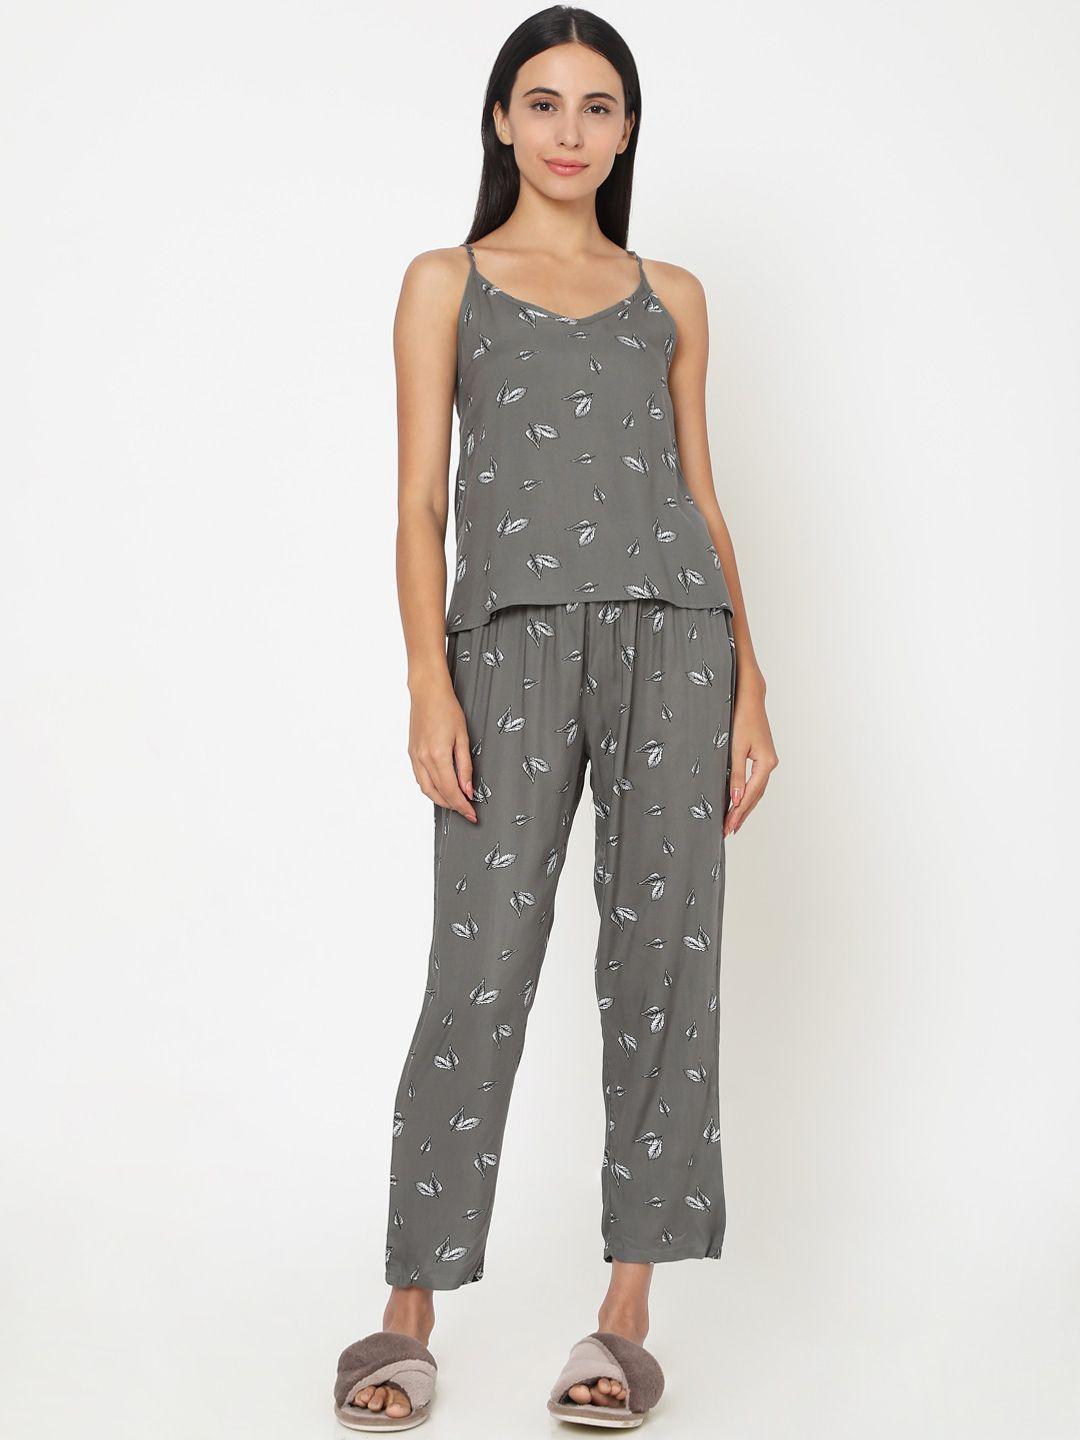 smarty-pants-women-grey-&-white-printed-pure-cotton-night-suit